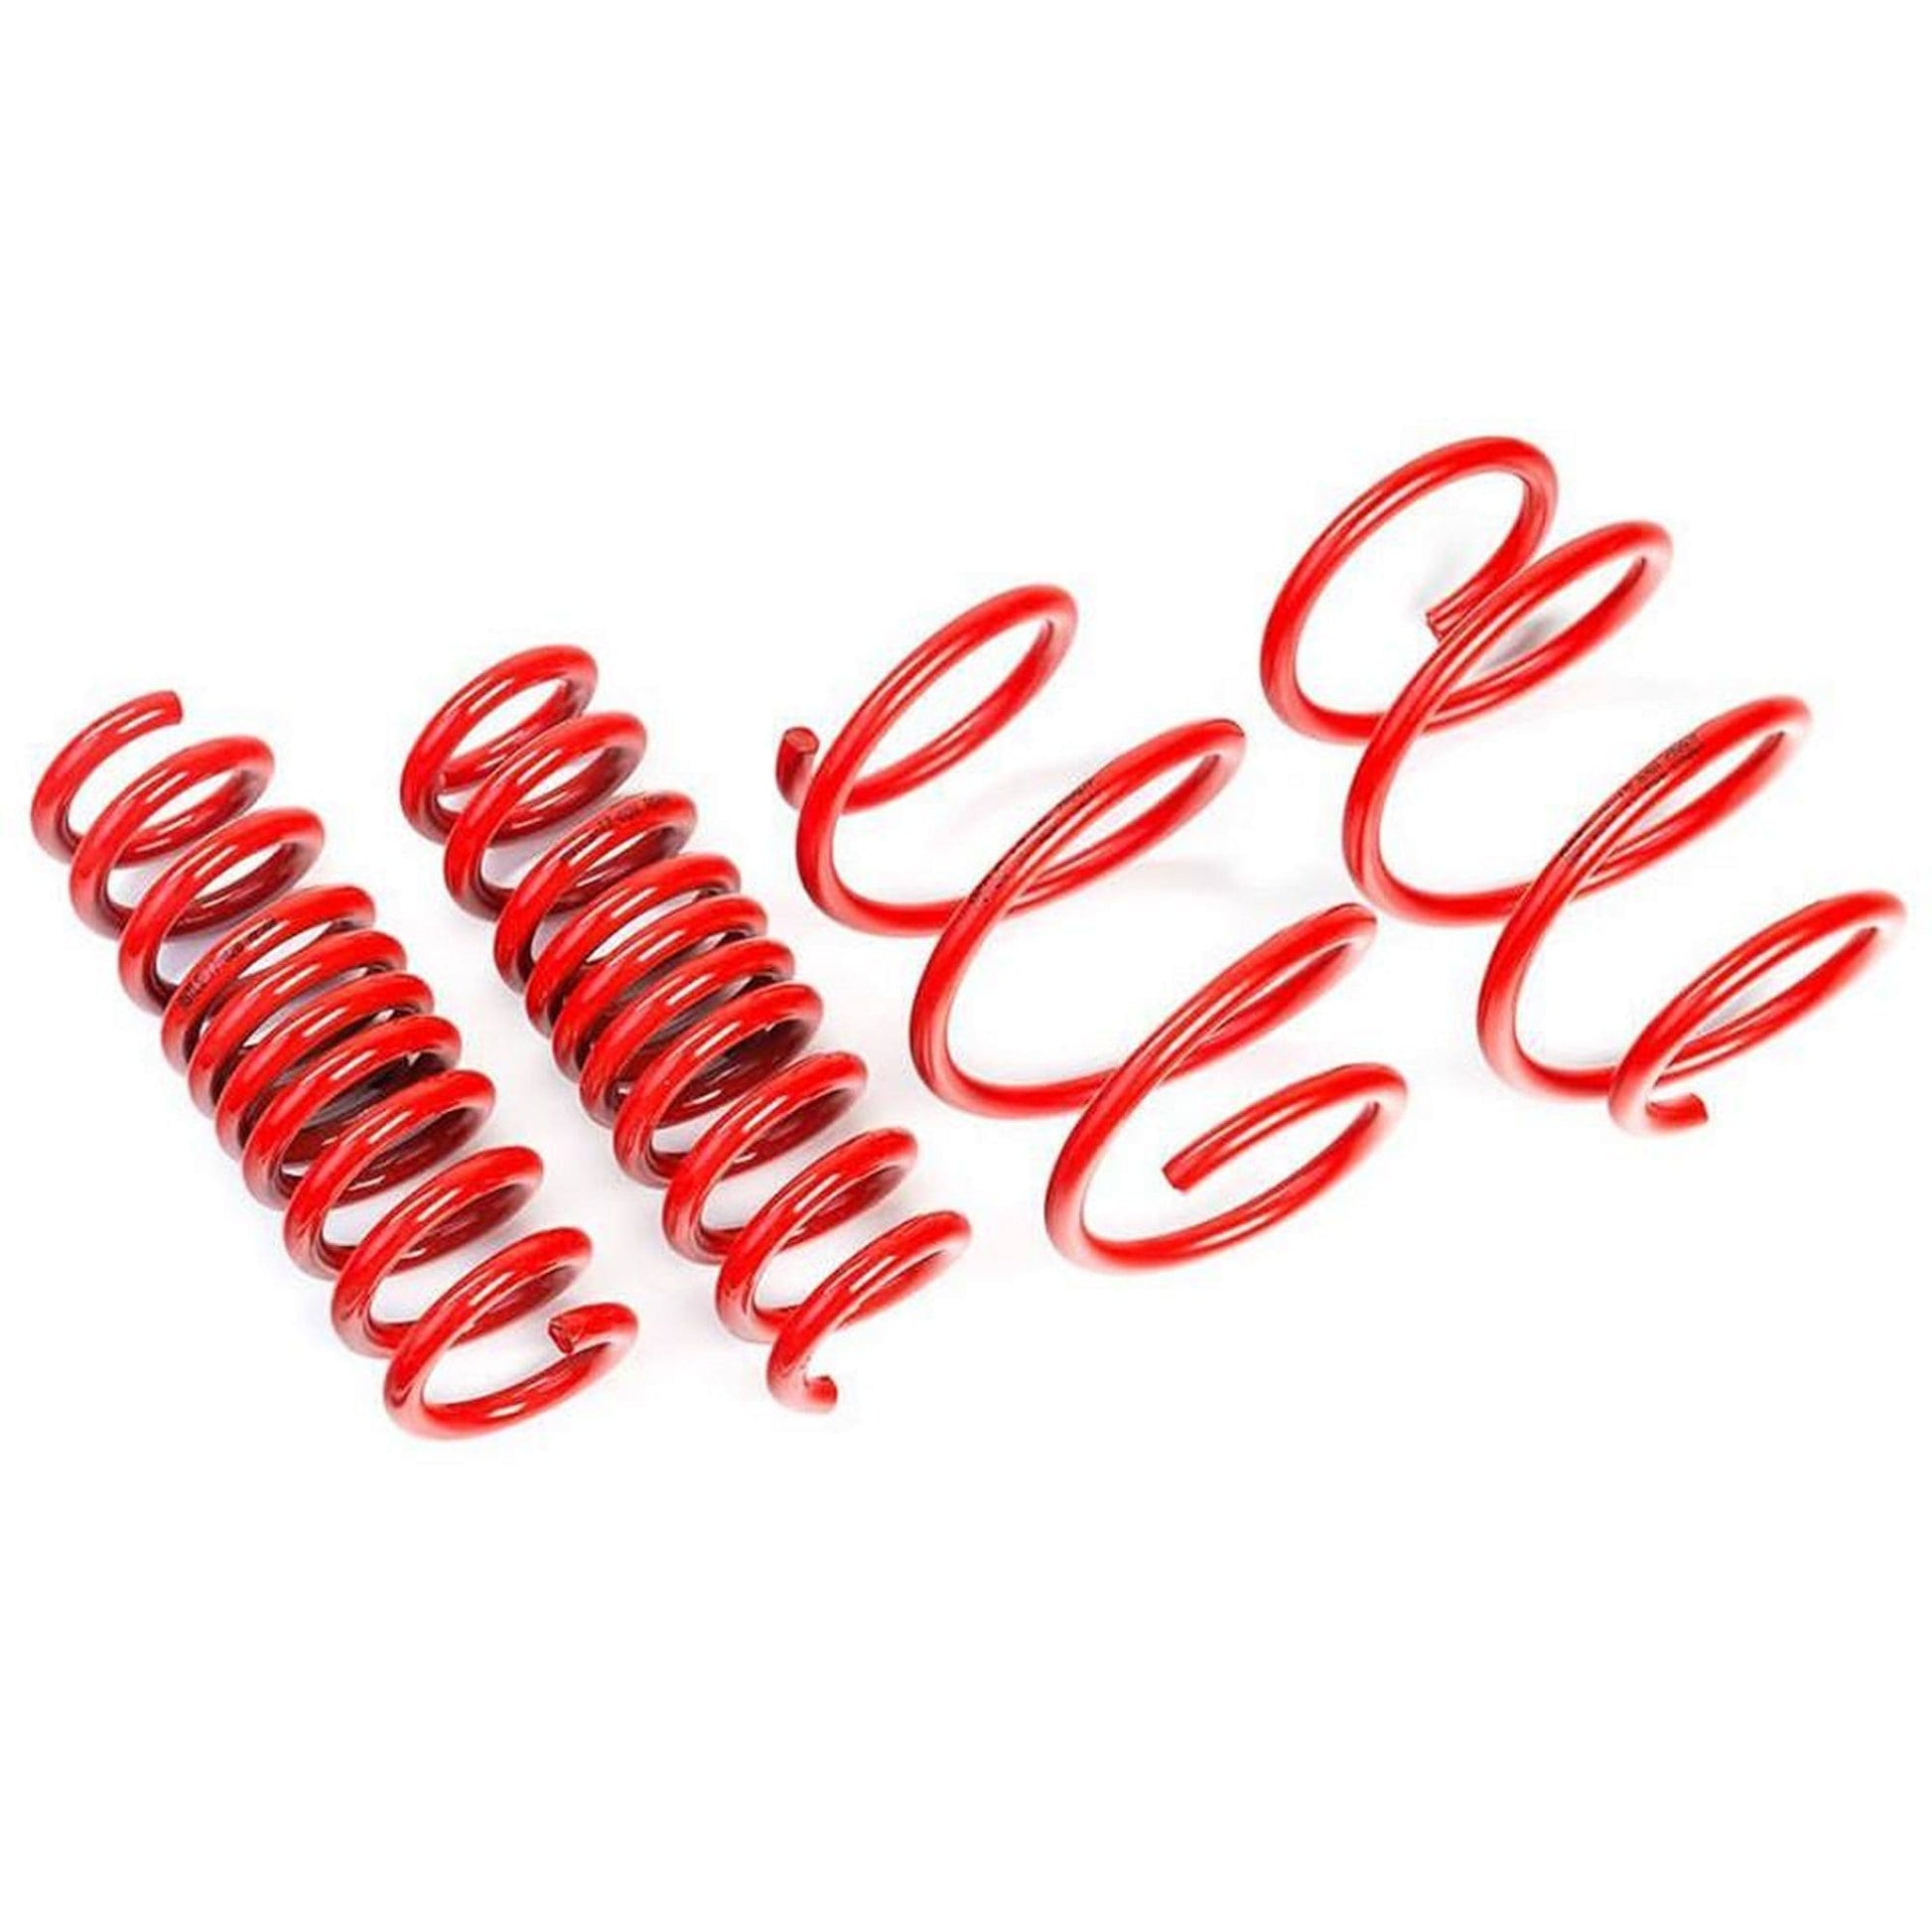 MANHART ASTGP31101 SPORT SPRINGS FOR MINI F56 GP3 BY AST SUSPENSION (20-15 MM)